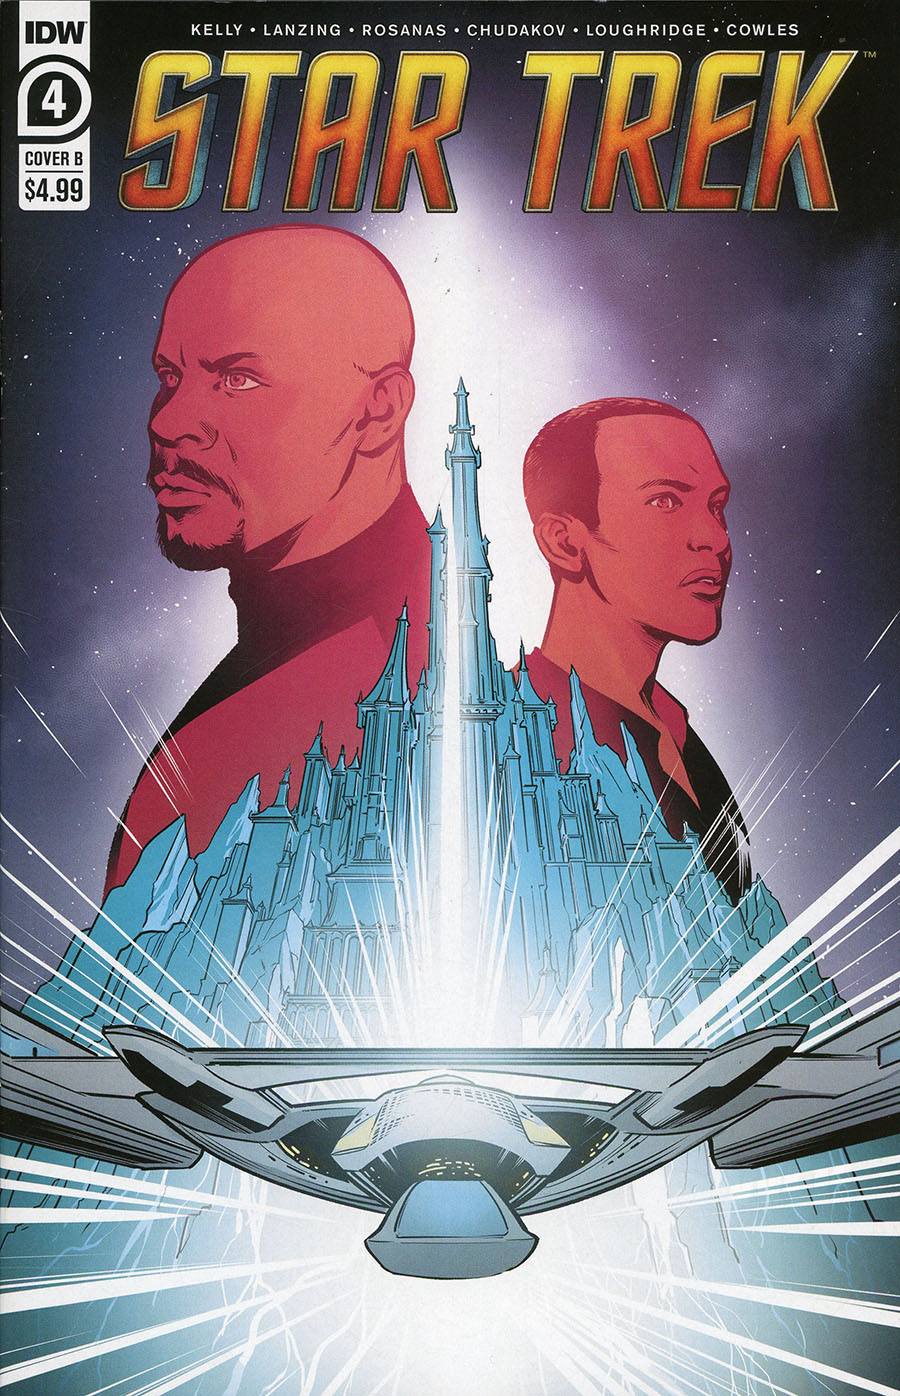 Star Trek (IDW) Vol 2 #4 Cover B Variant Marcus To Cover